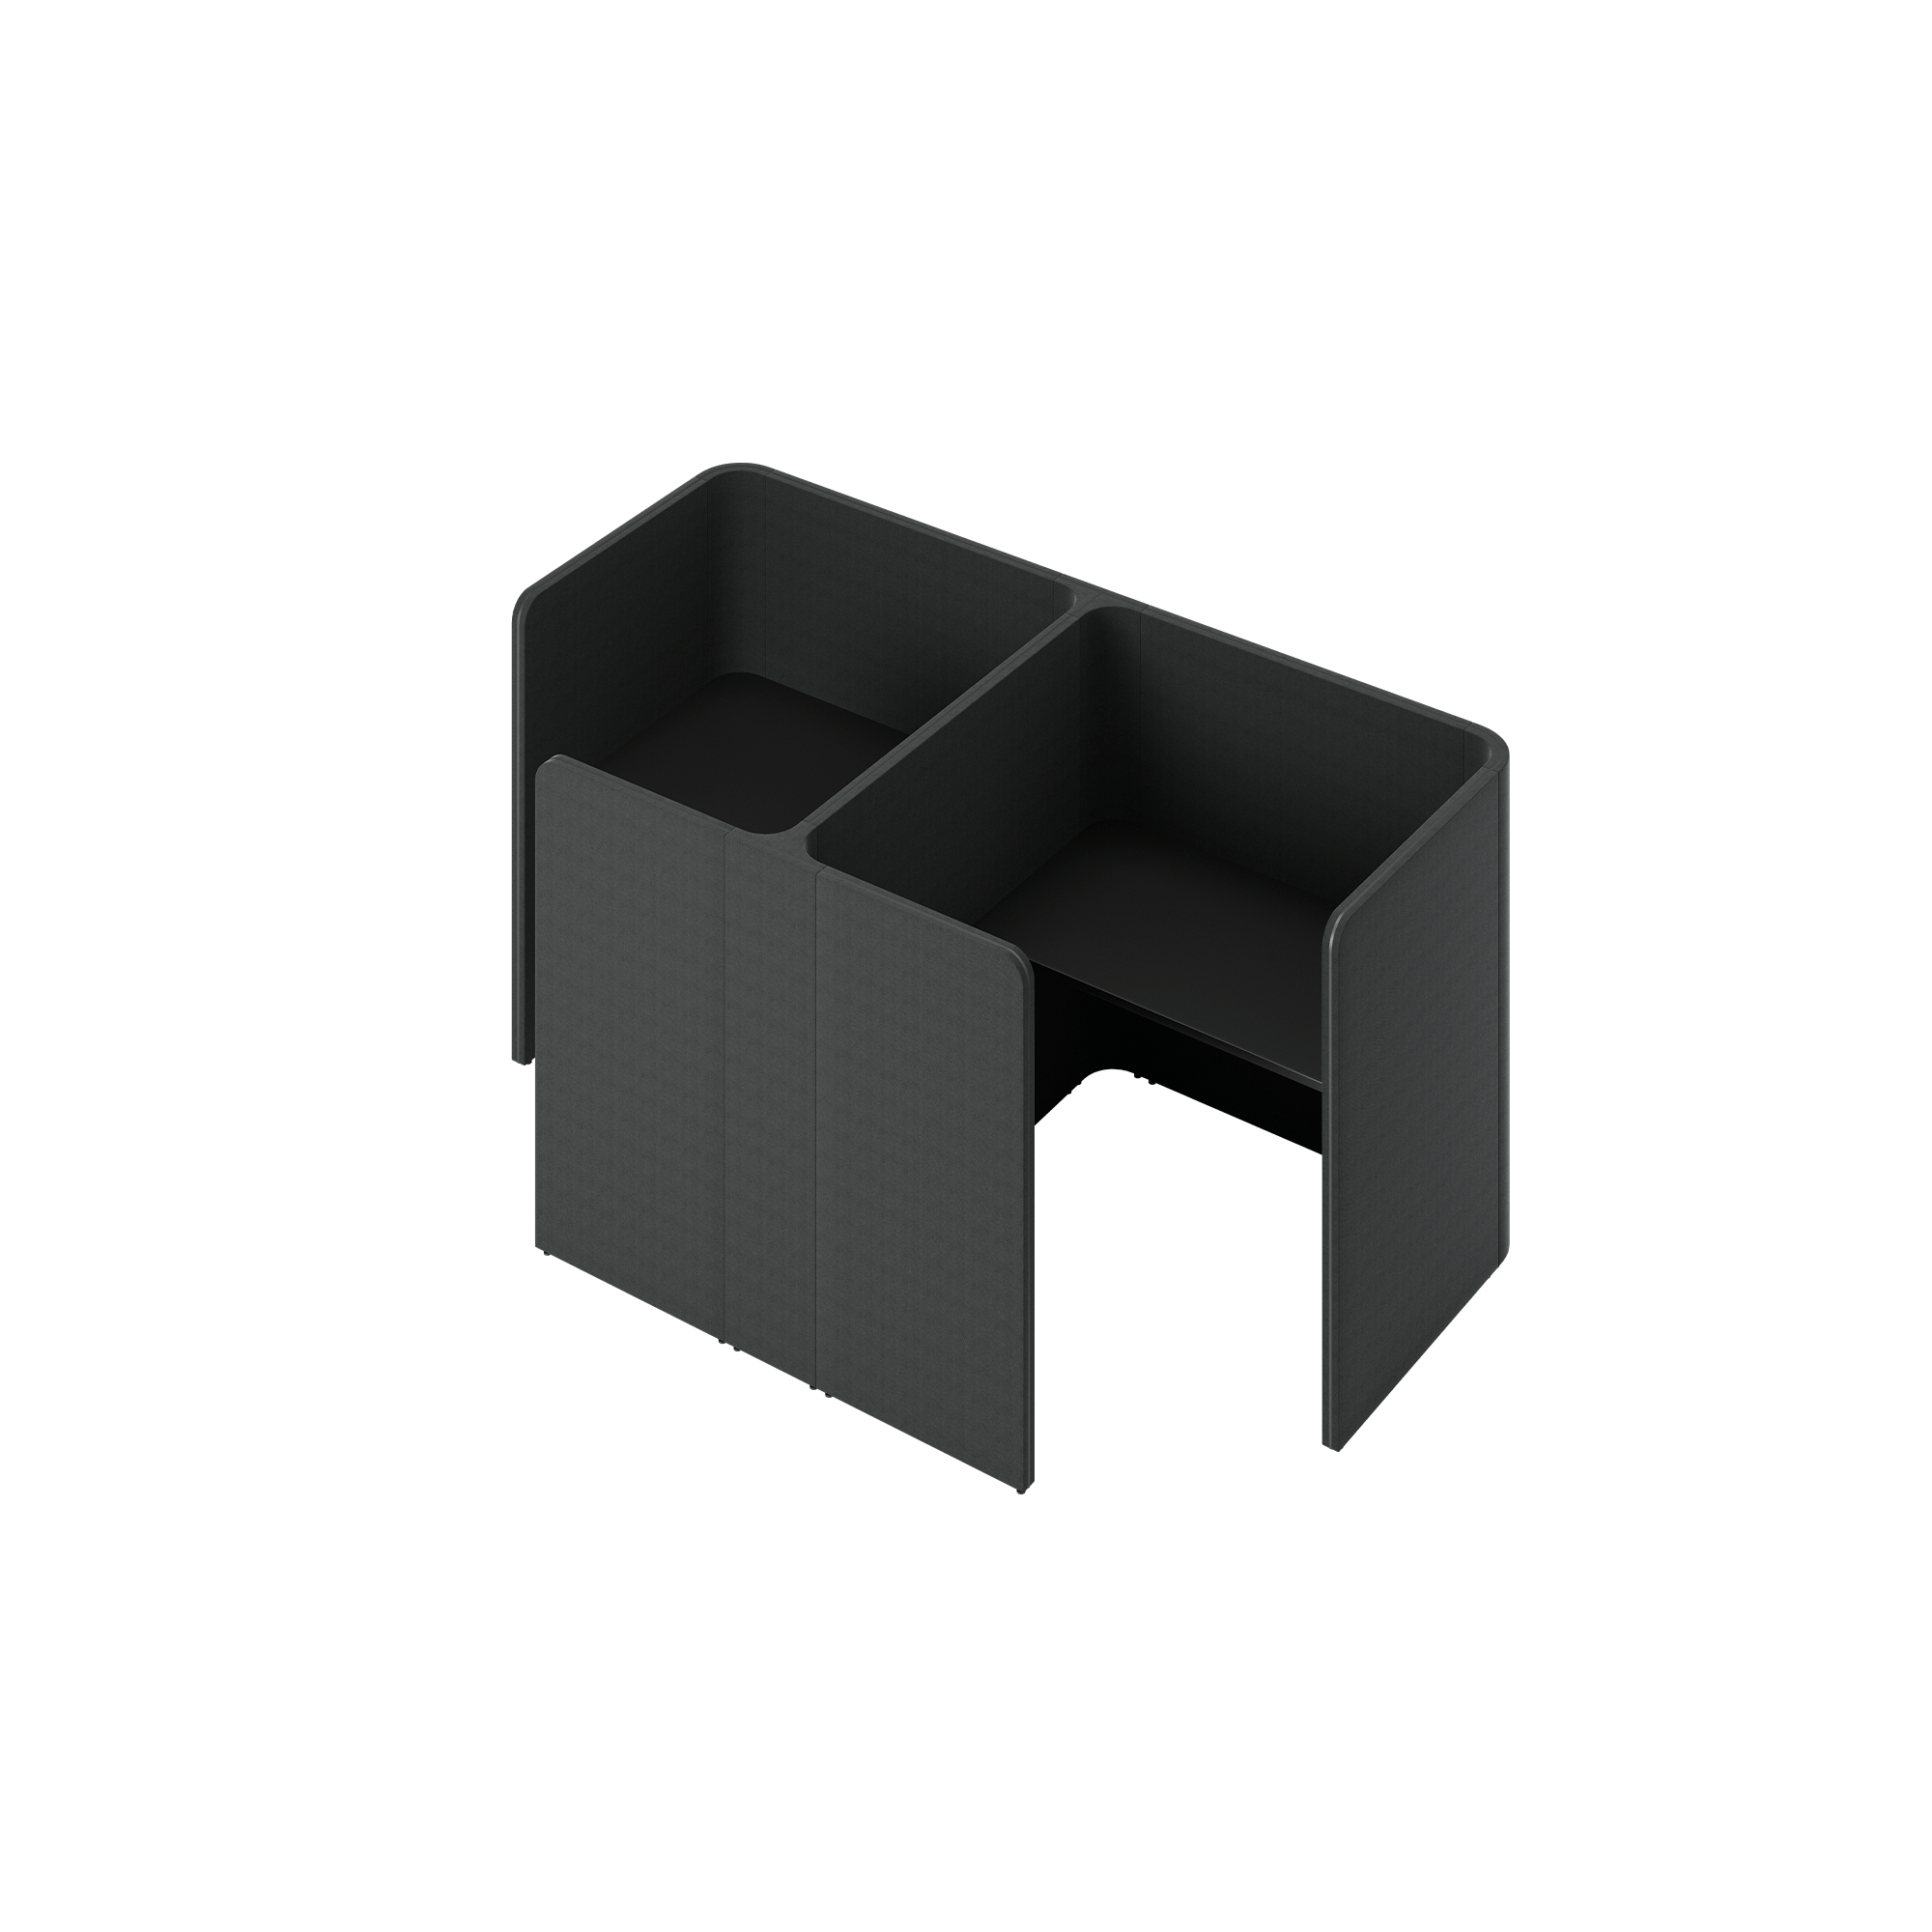 A black study booth with two compartments